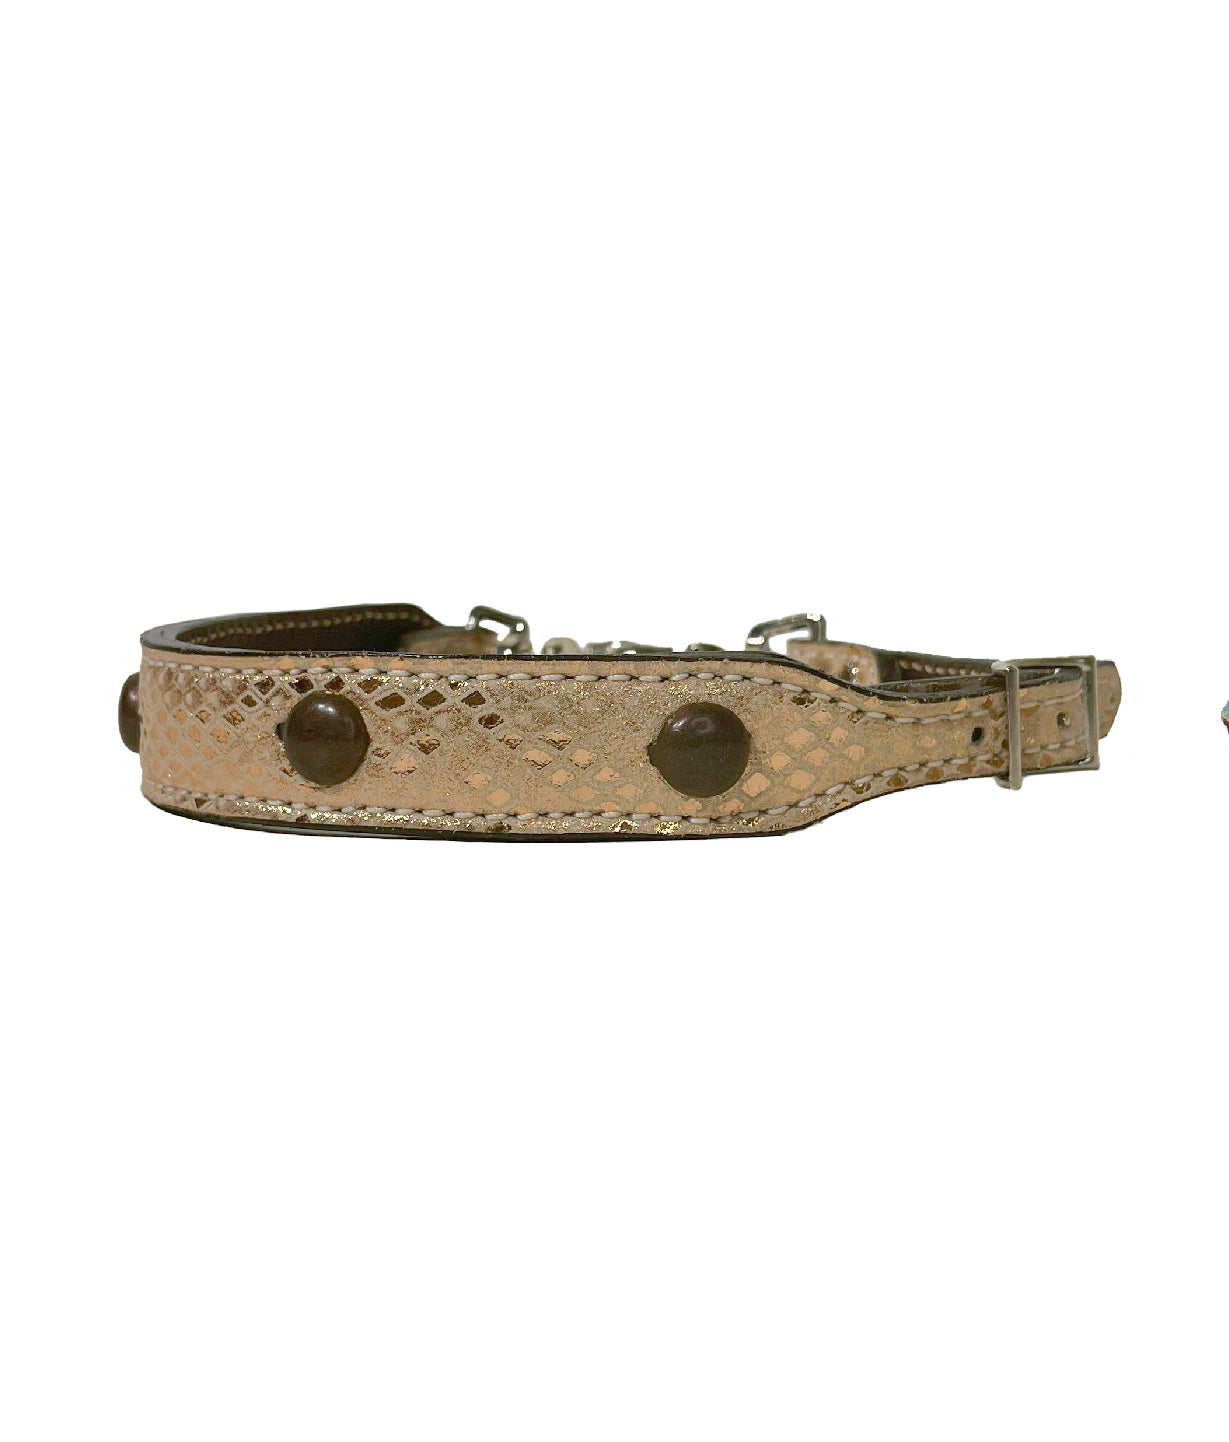 Wither strap chocolate leather mystic overlay with copper antique spots.